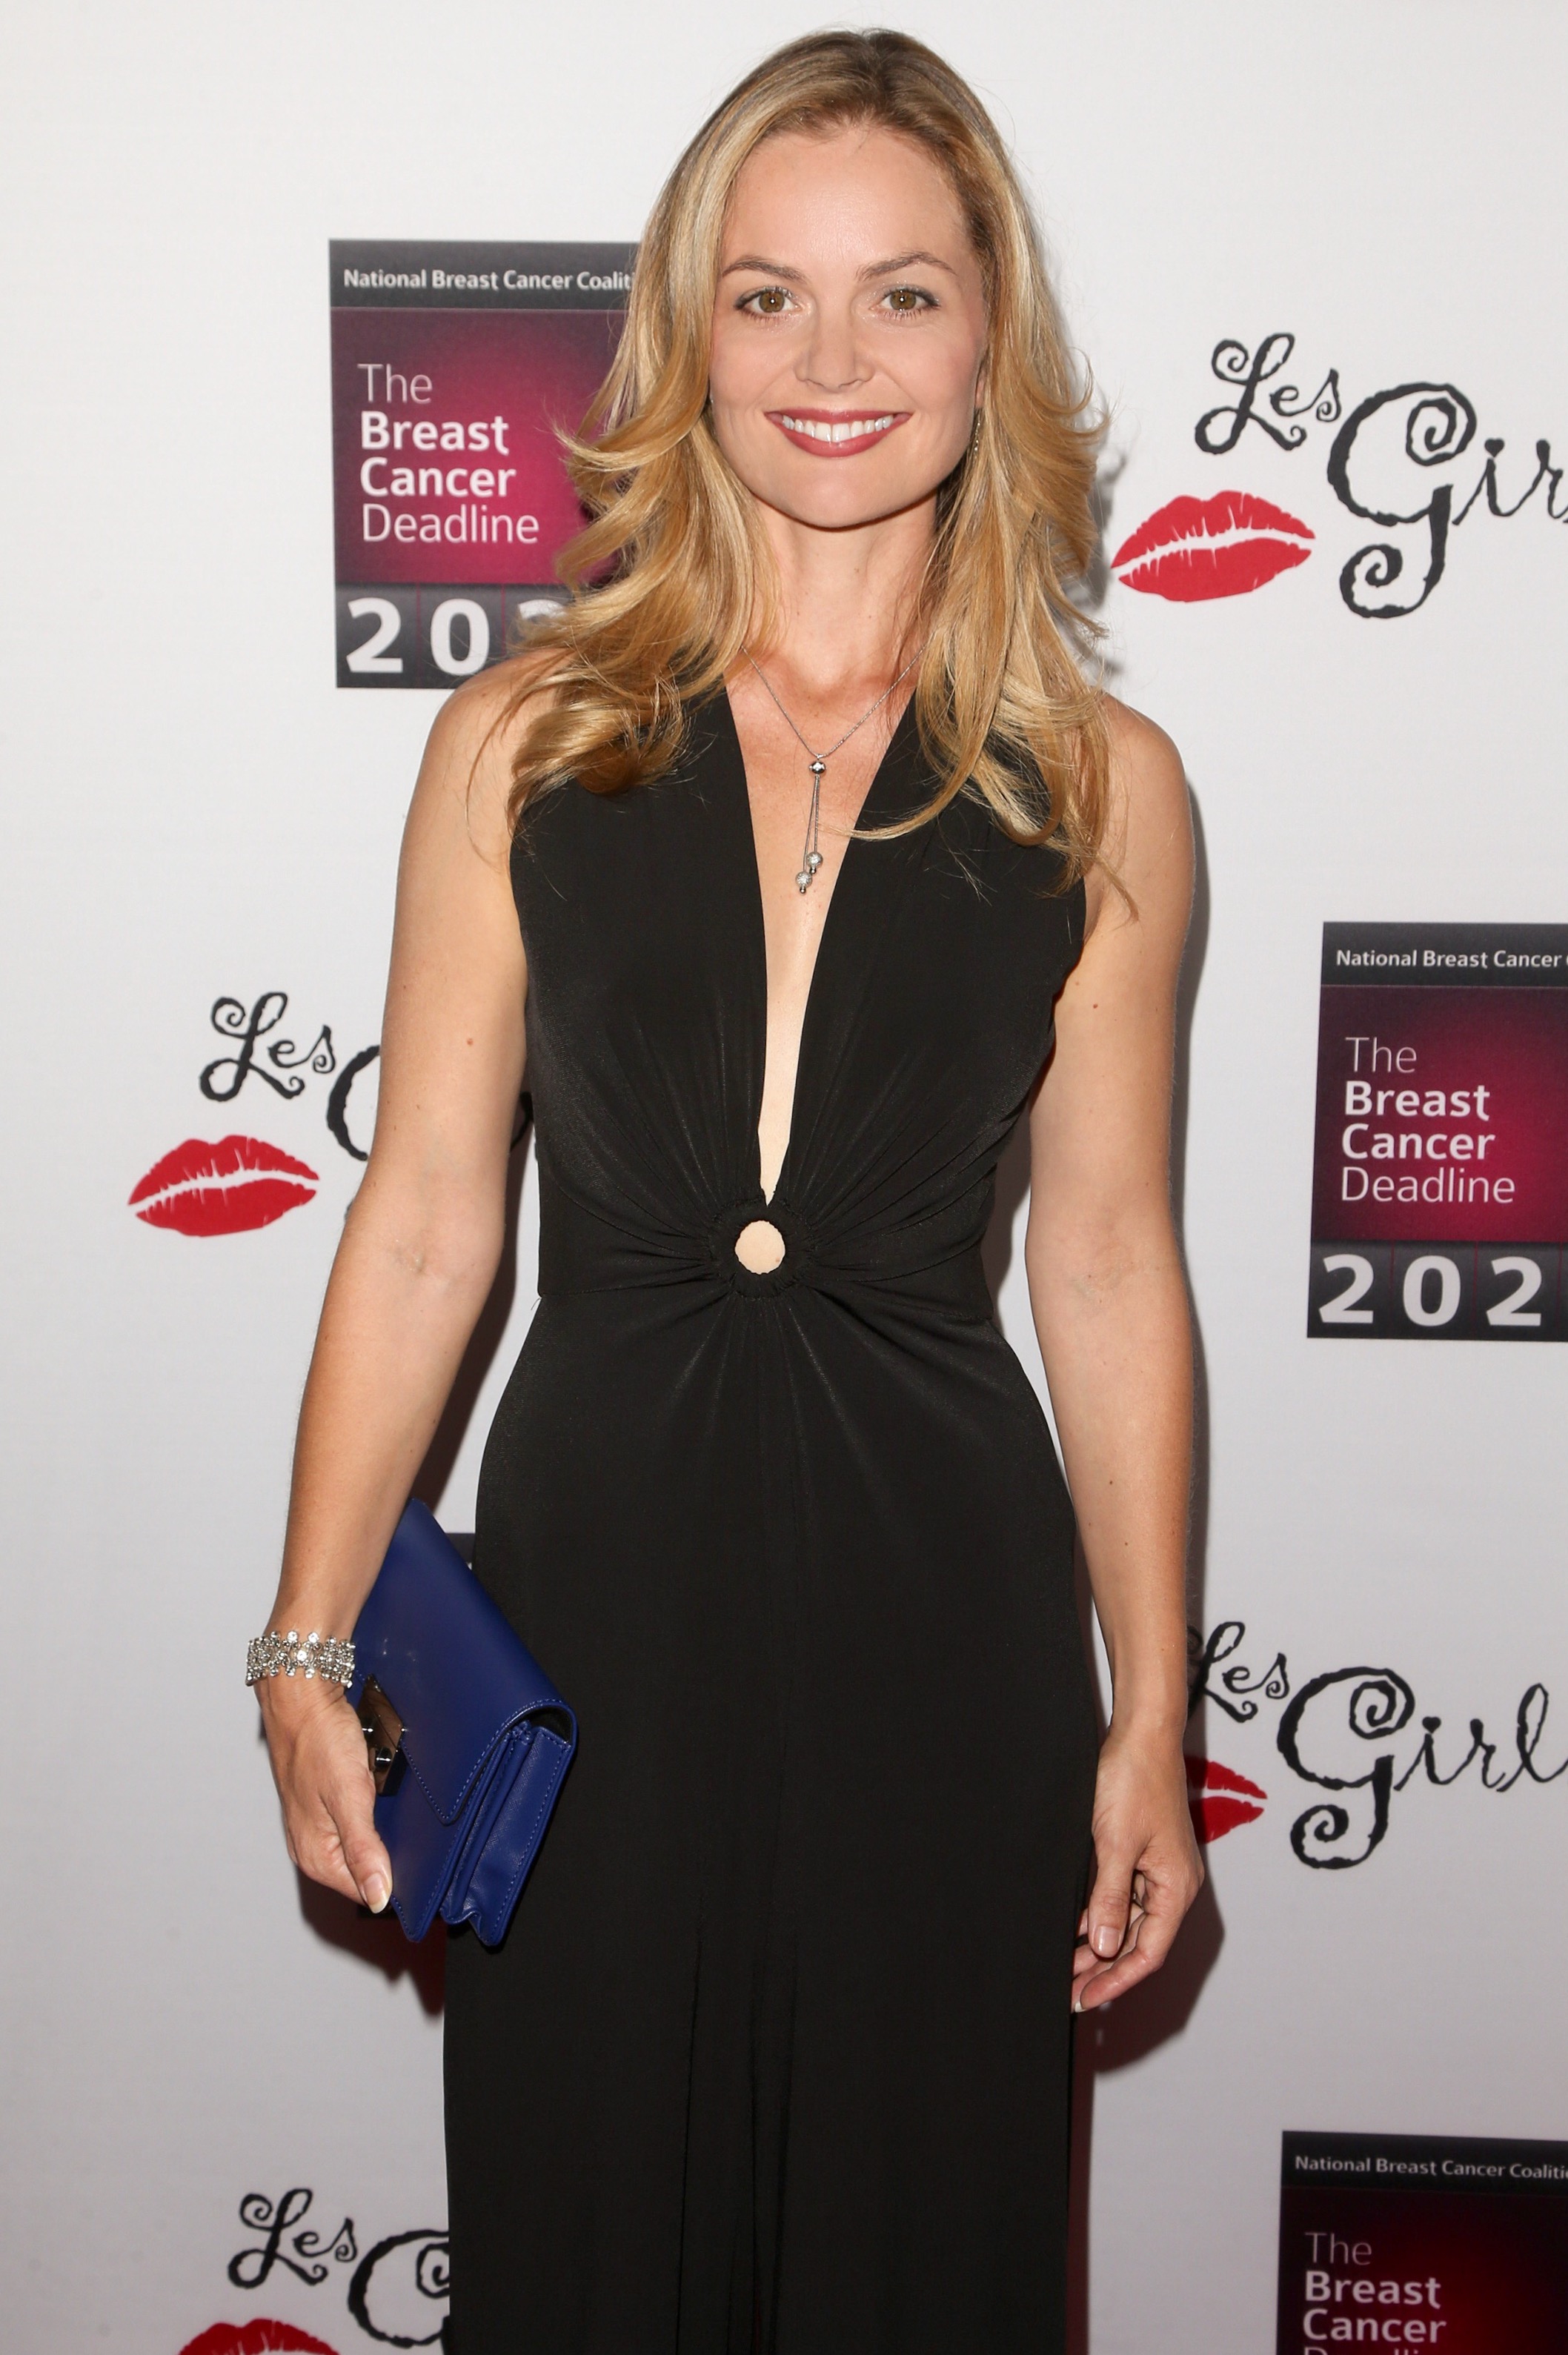 Carrie Schroeder attending the National Breast Cancer Coalition's Les Girls Benefit.